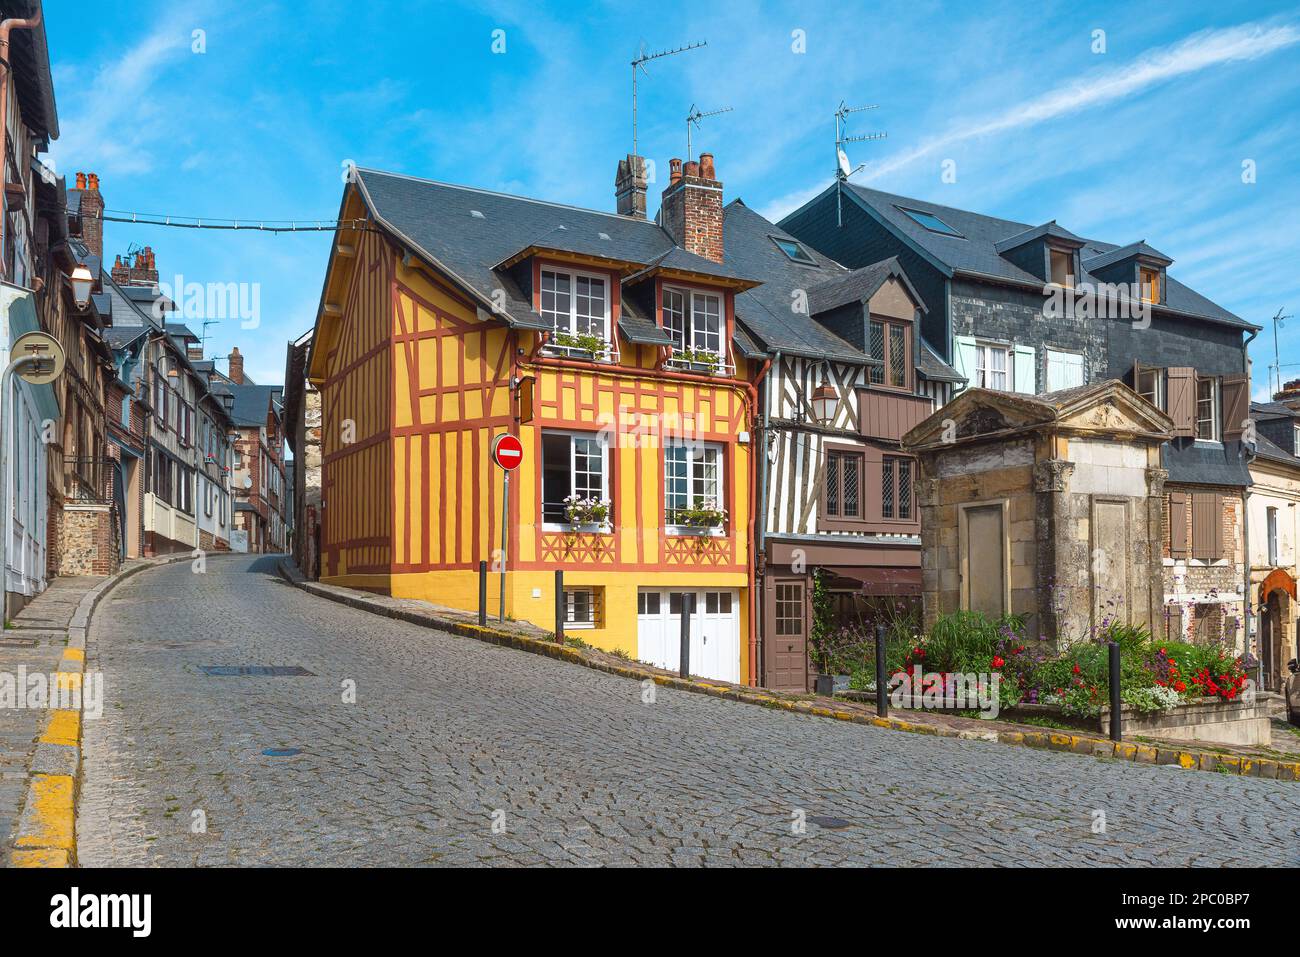 Old cozy street with timber framing houses in Honfleur, Normandy, France. Architecture and landmarks of Honfleur, Normandie Stock Photo